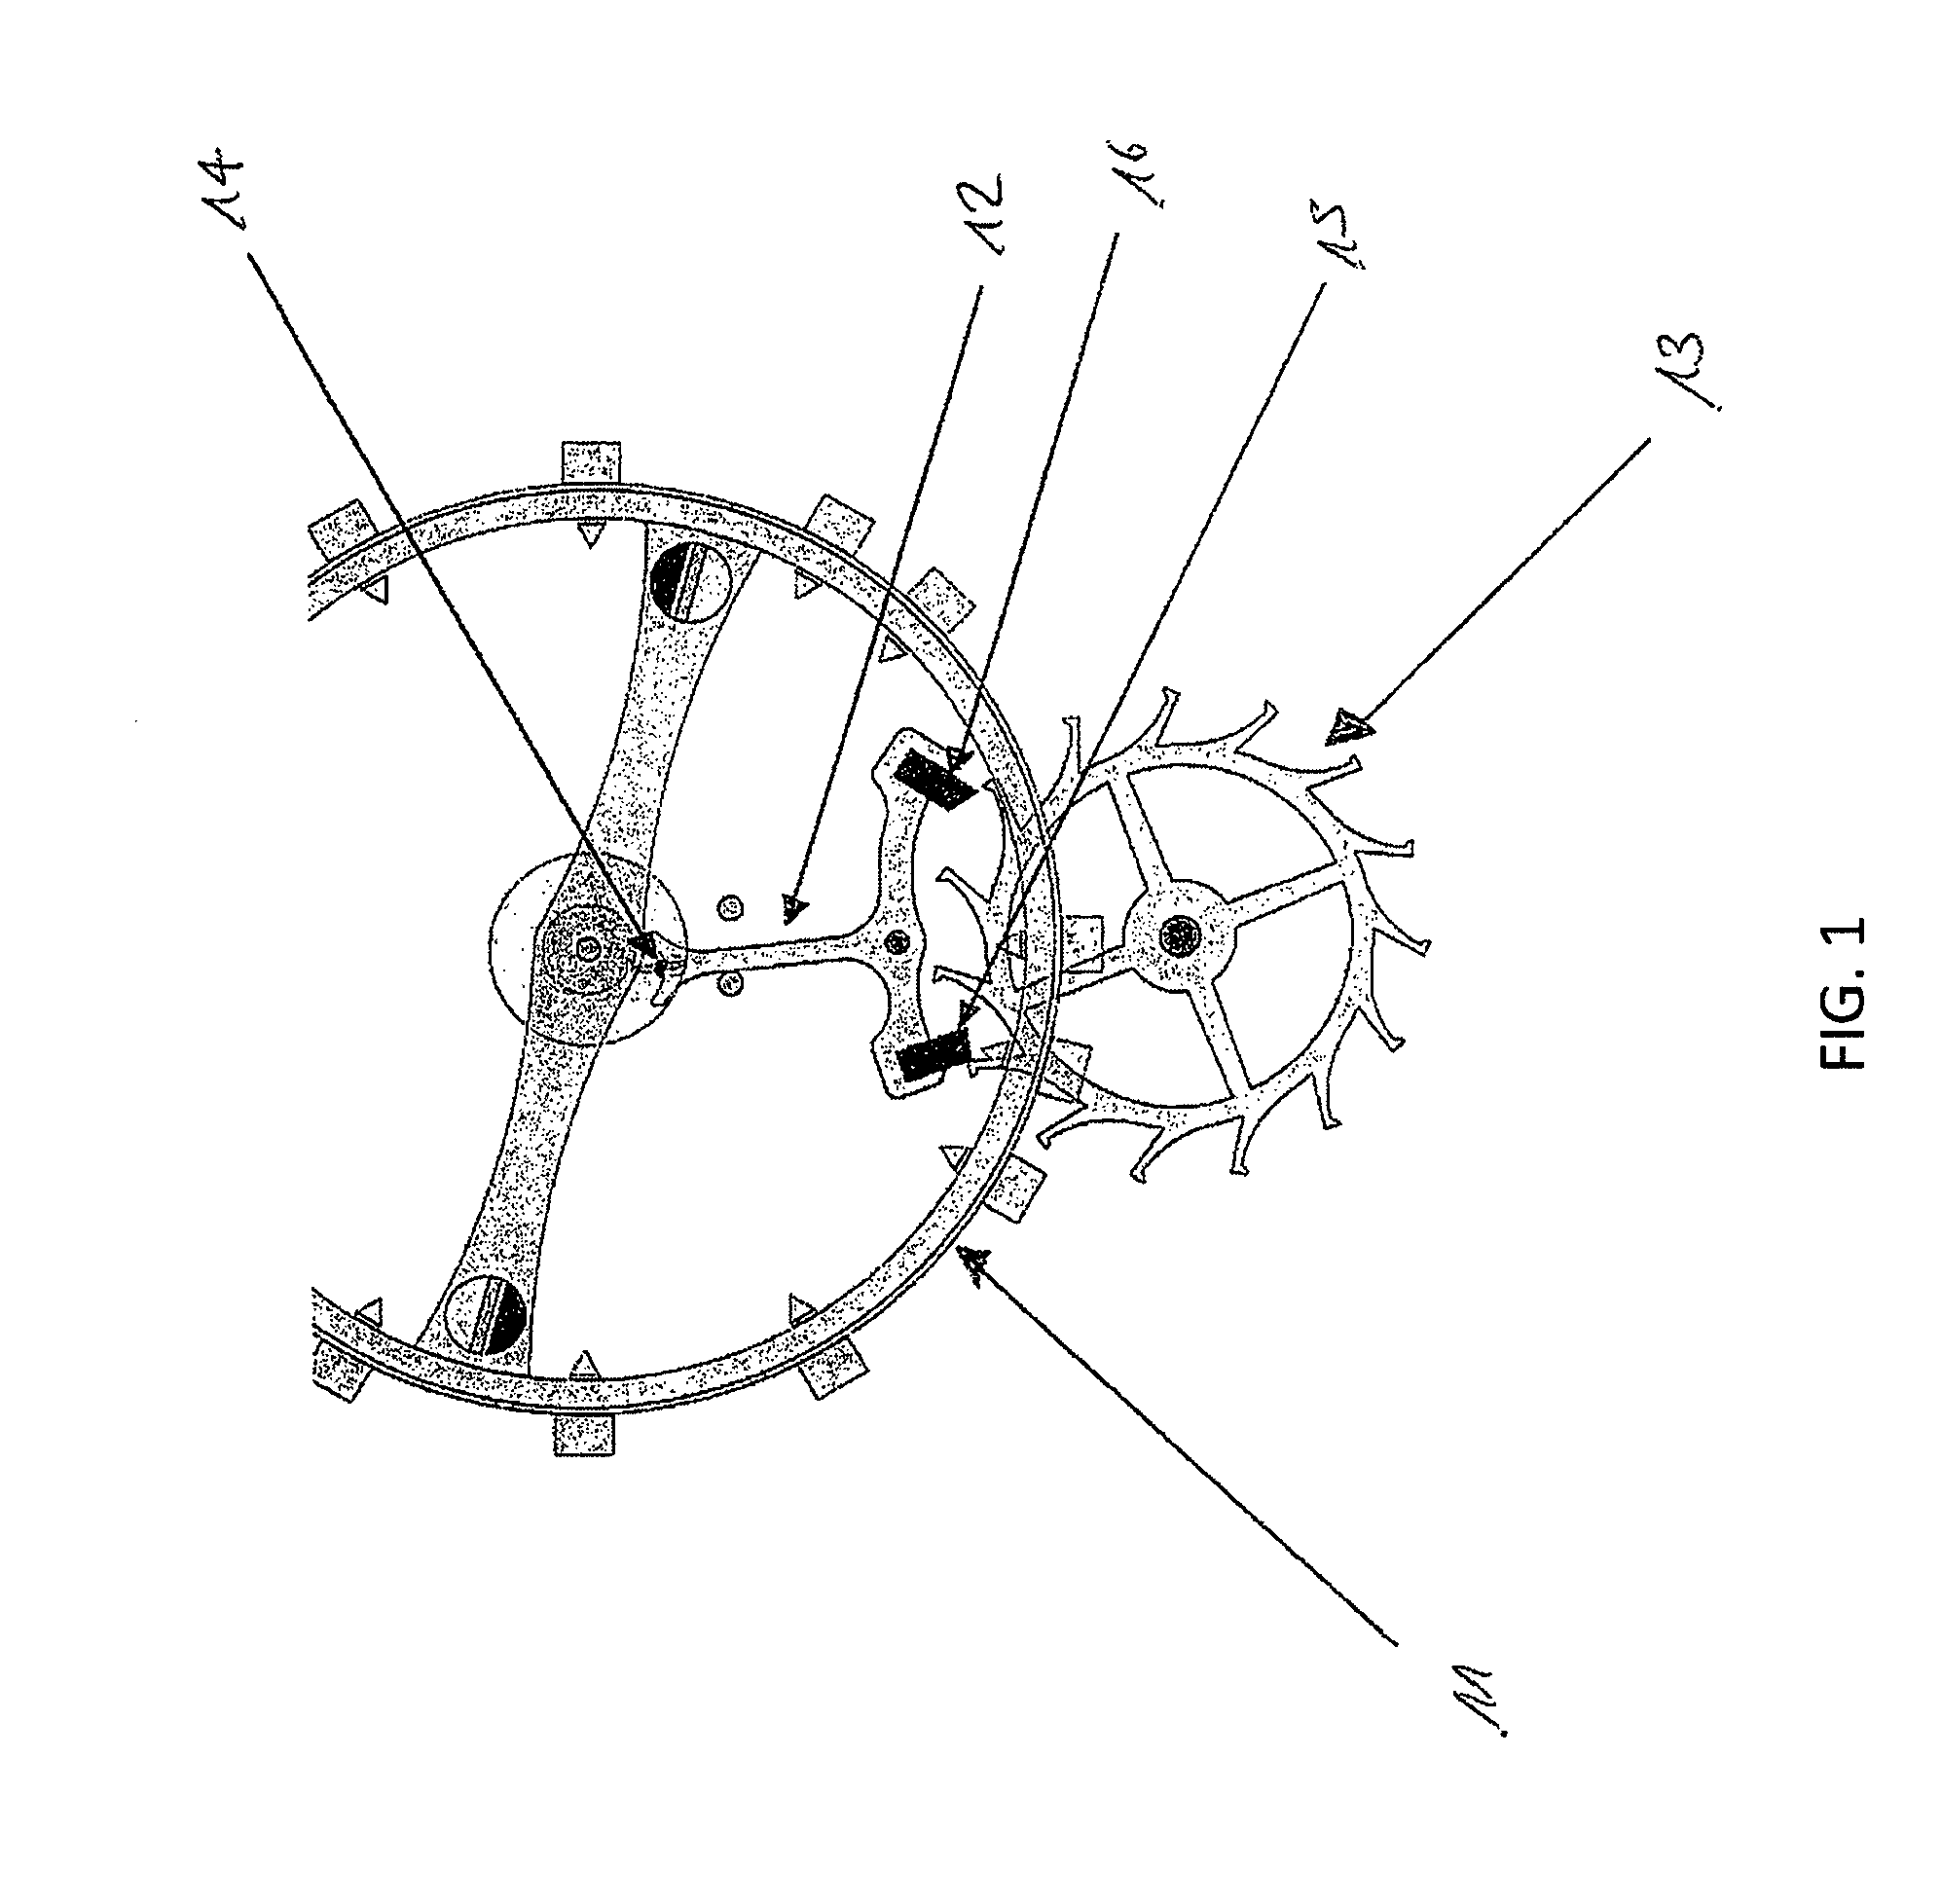 Method and system for authenticating using external excitation